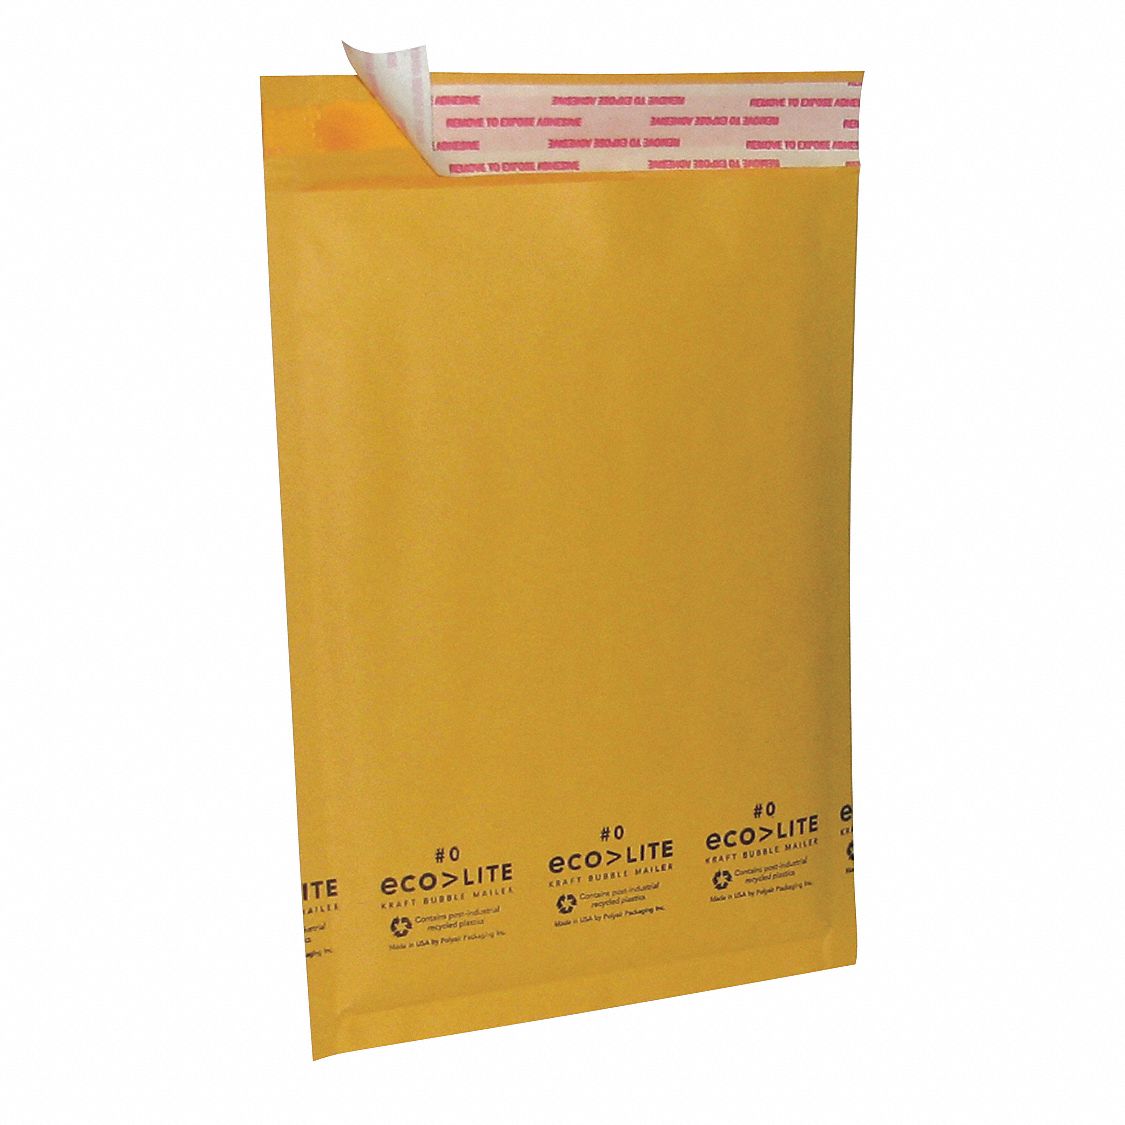 Envelopes & Mailers